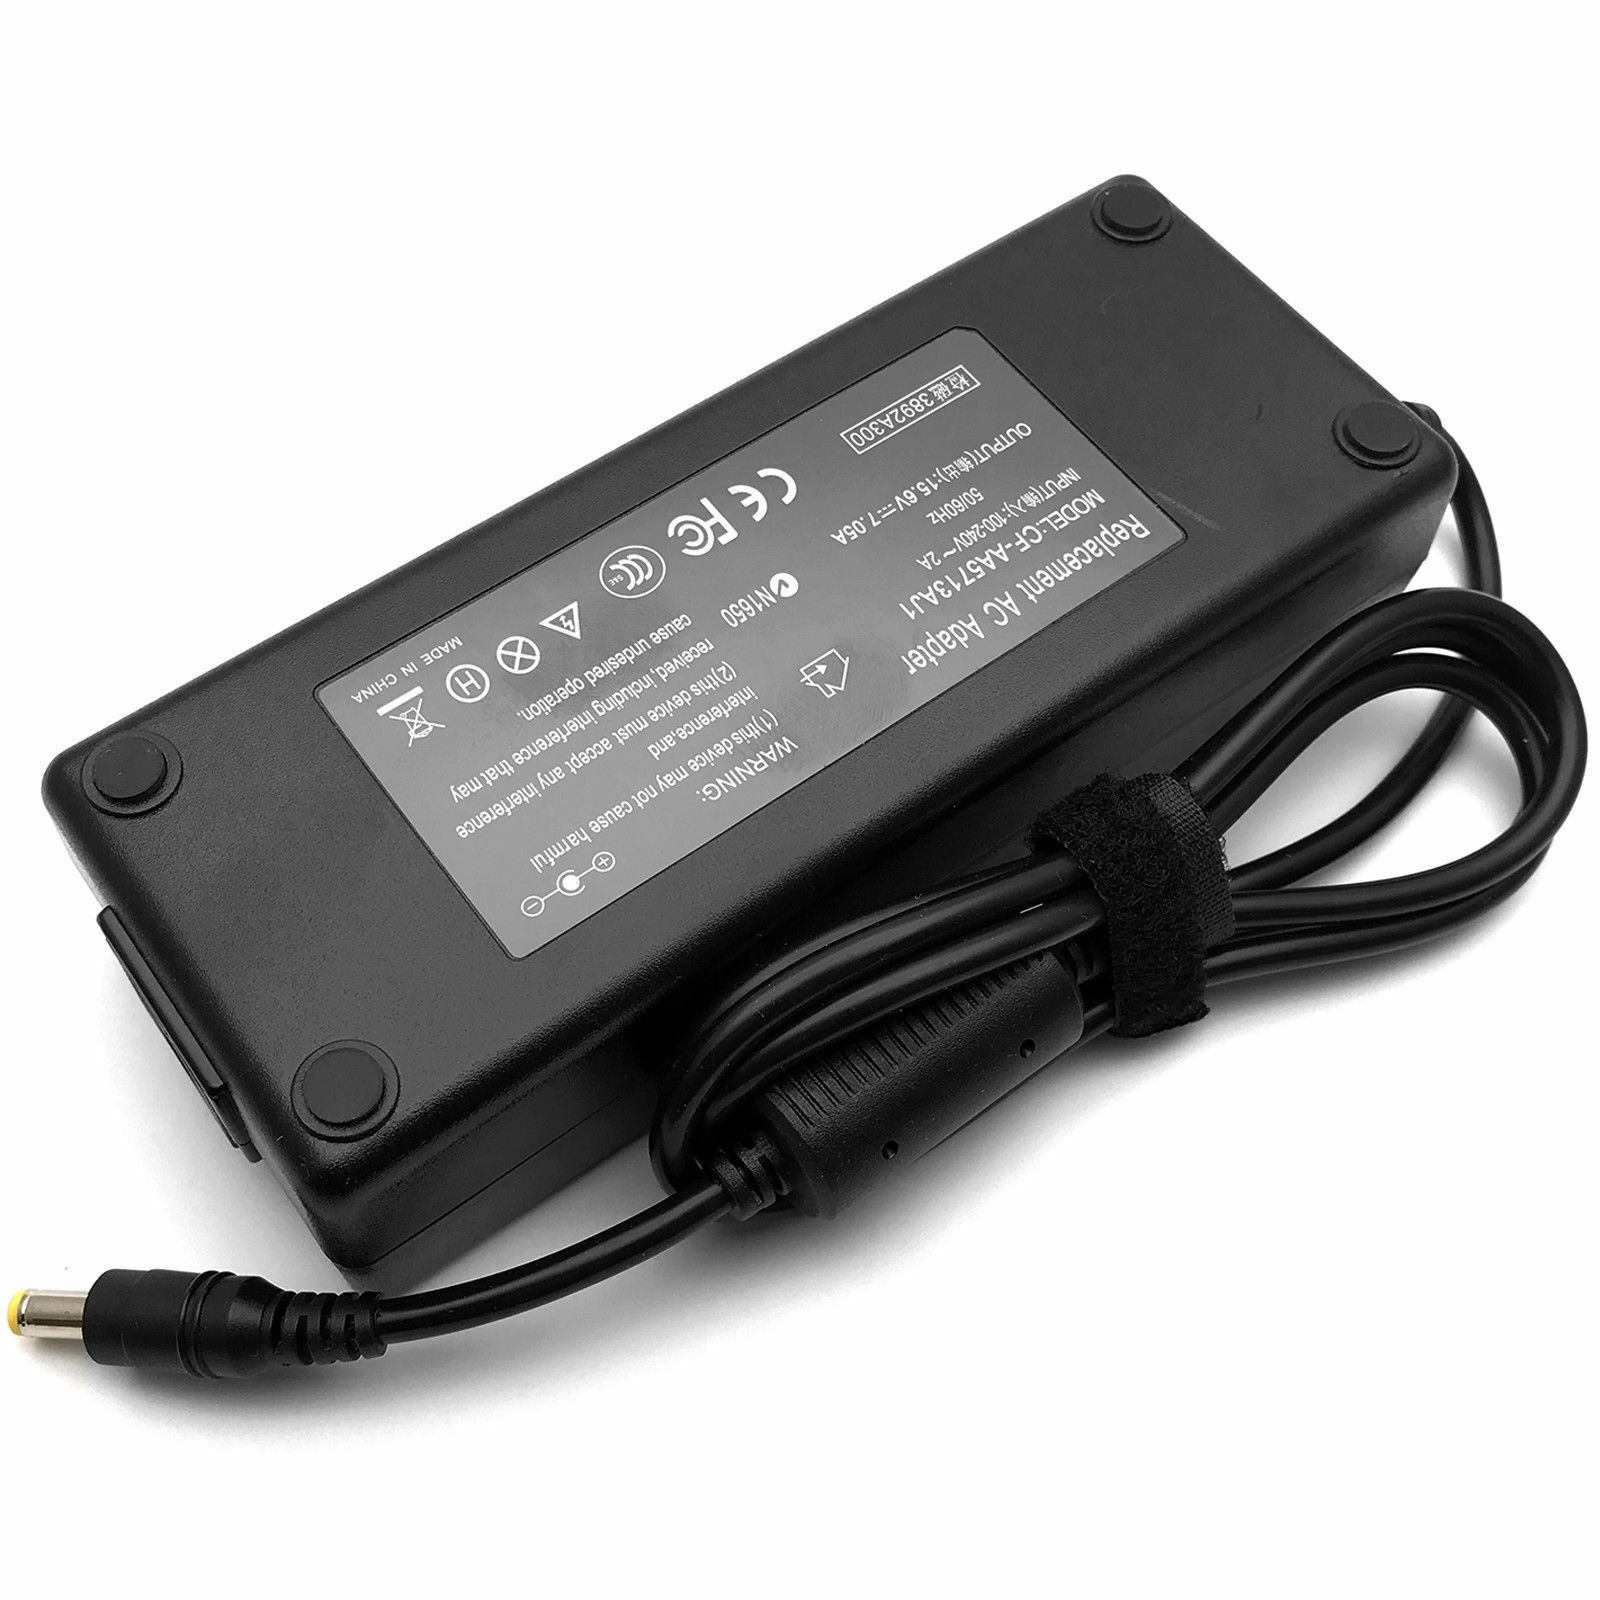 15.6V AC Adapter Charger For Panasonic Toughbook CF-19 CF31 CF52 CF-53 CF-53S - image 3 of 5